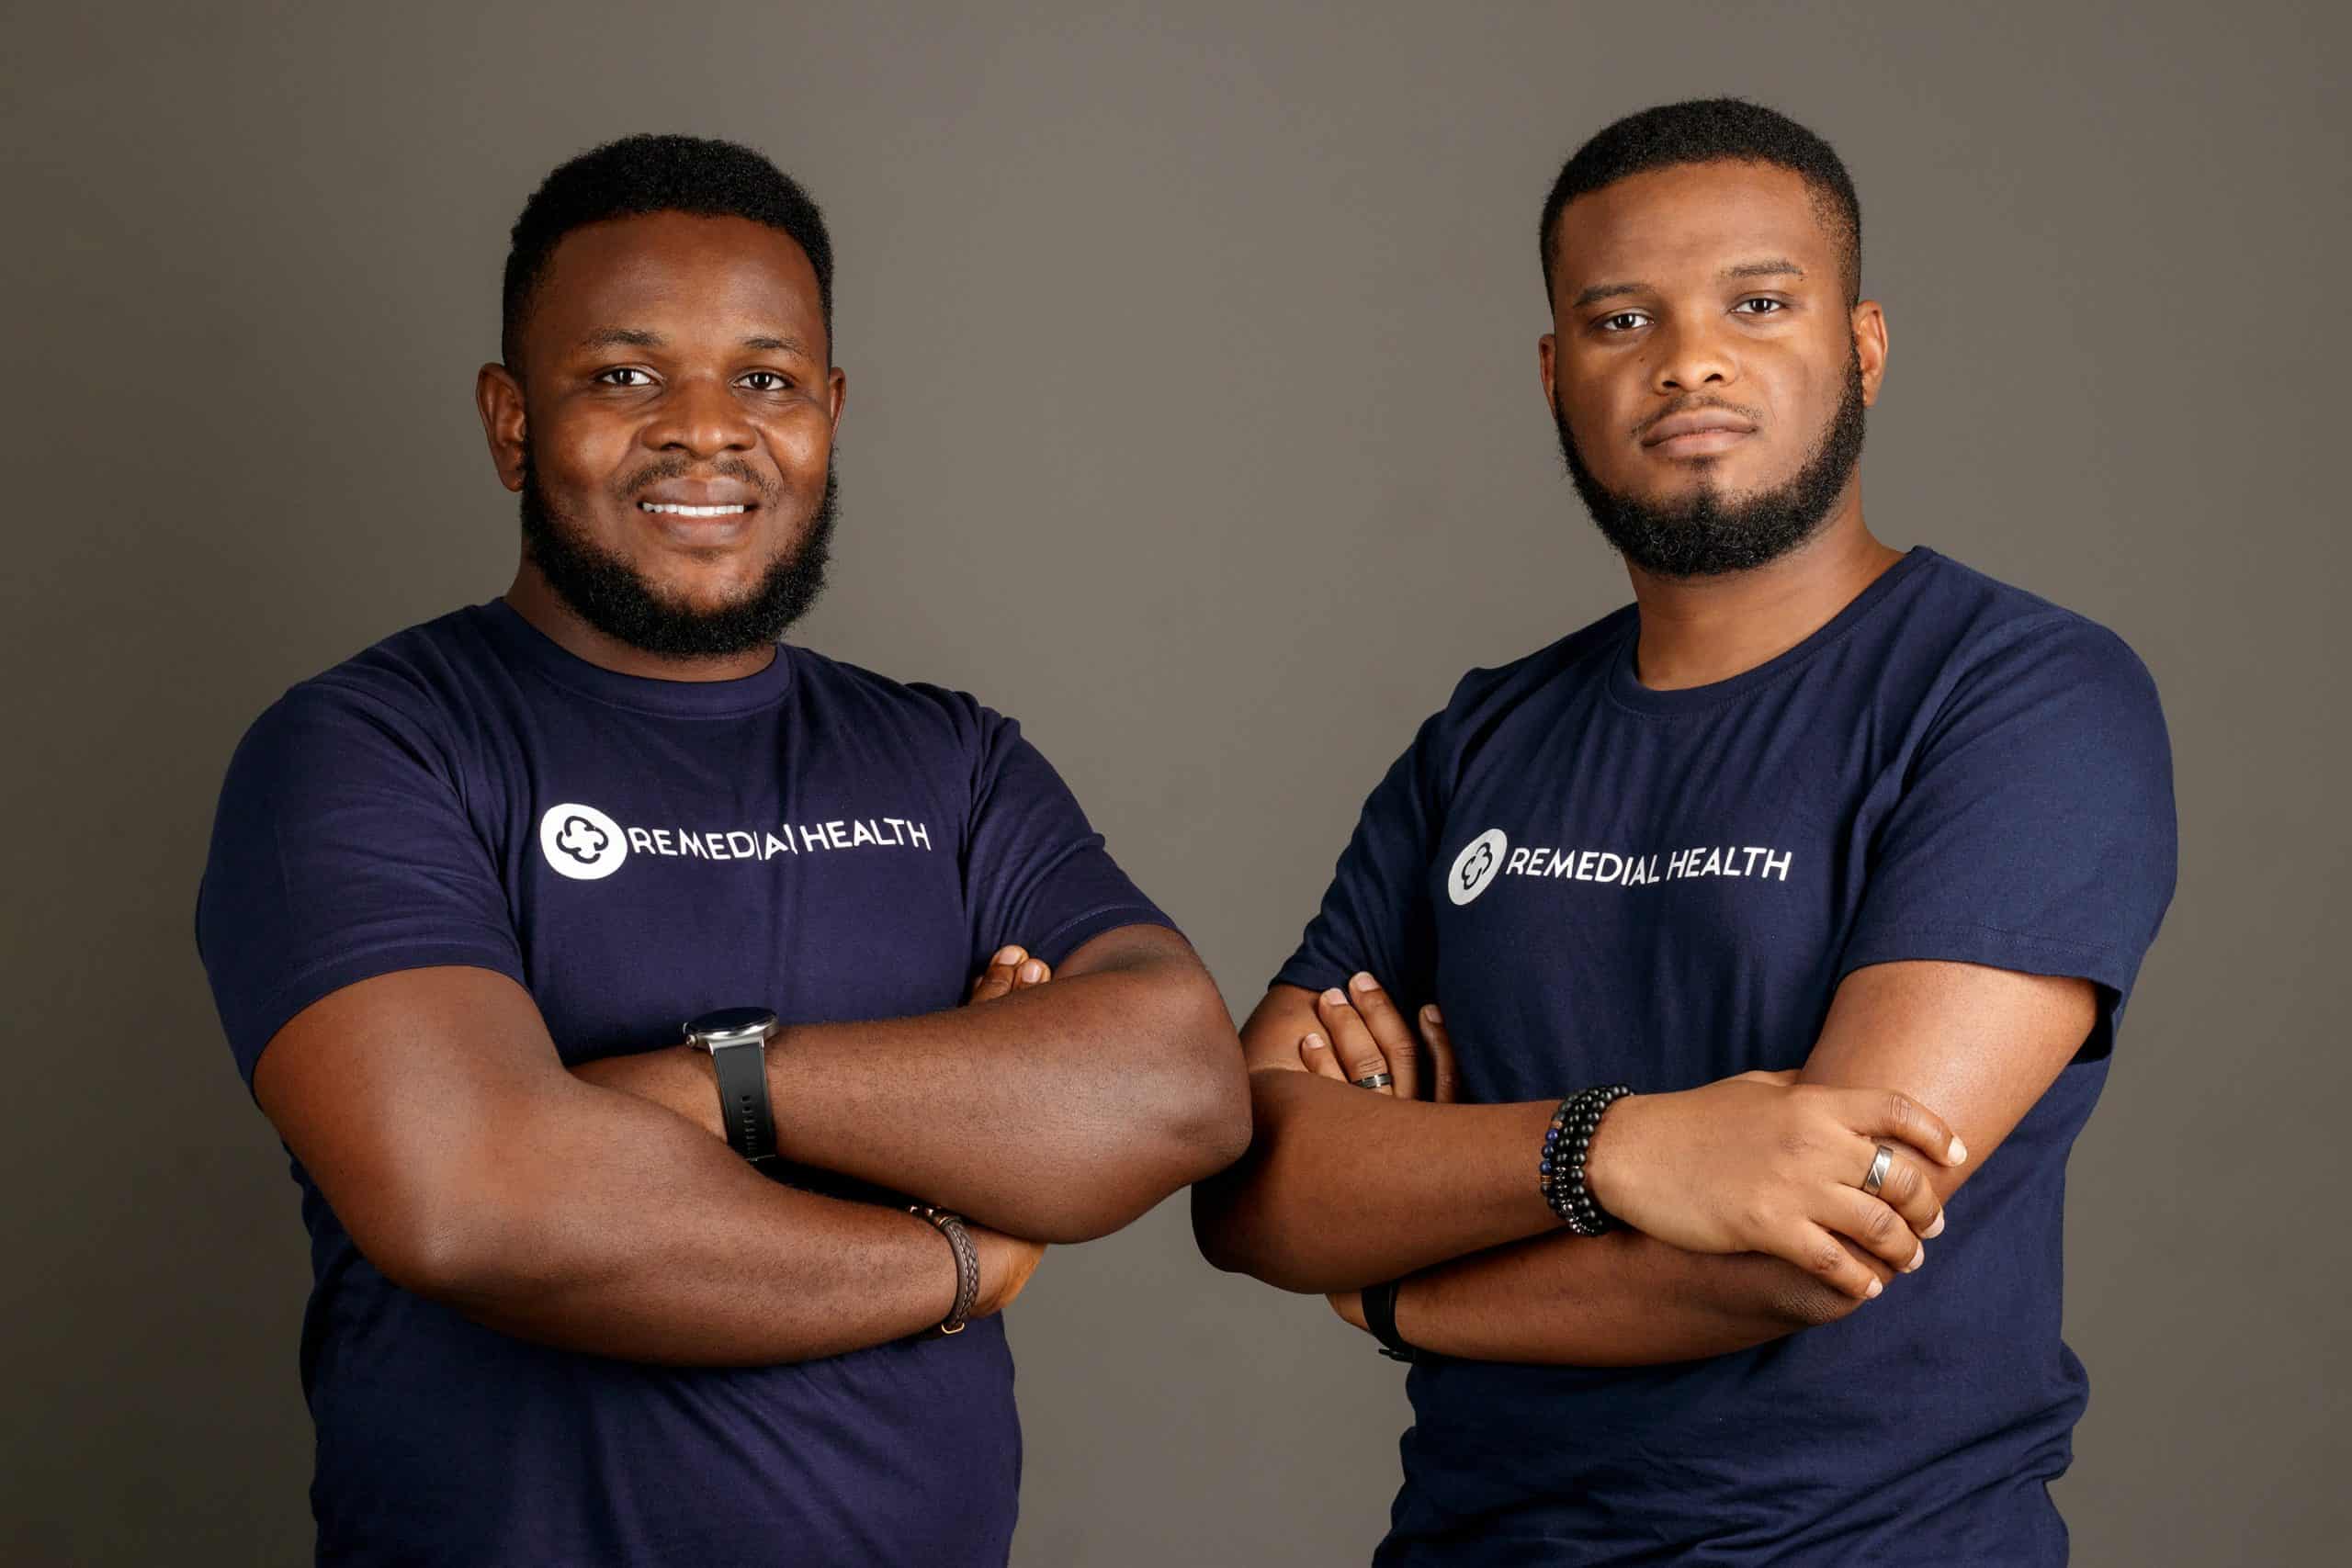 Remedial Health Secures $1 million in Pre-seed Funding